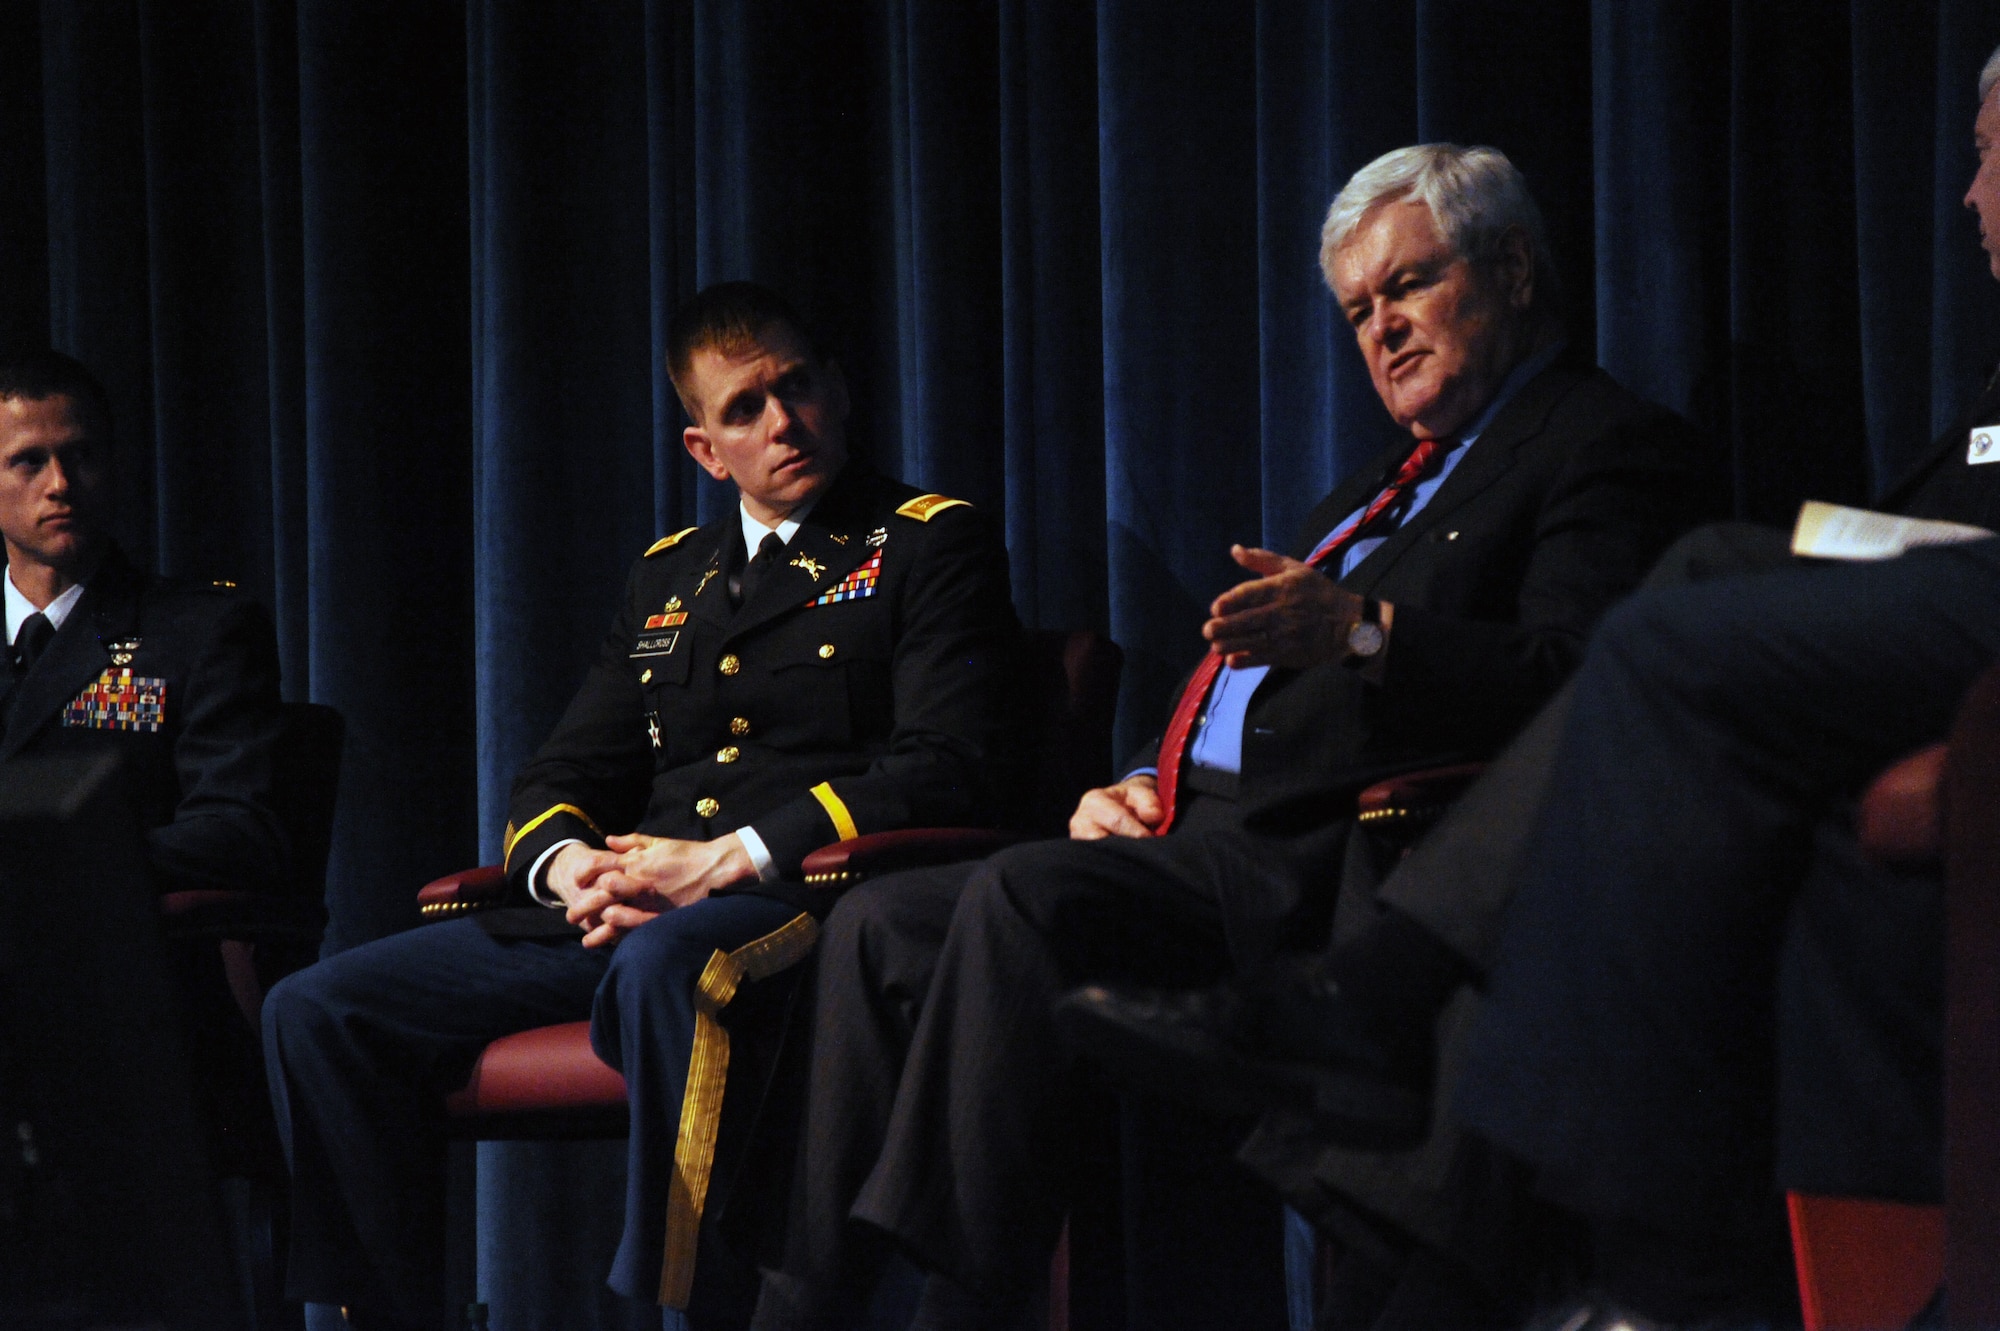 While at Maxwell March 8, the Honorable Newt Gingrich participated in a panel discussion with Air University and Air Force Institute of Technology students and faculty. Research topics presented included cyber, nuclear deterrence and advanced statistical techniques to examine patterns of armed conflict. The event was used to showcase the intellectual capability and talent at AU and AFIT and to generate a discussion to spur thinking about national security objectives. Presenting were Col. William Young and Maj. Sam Kidd (AU-cyber), Army Maj. Nicholas Shallcross (AFIT-statistical techniques) and Dr. David Palkki and Maj. Allen Cohen (AU-deterrence). (U.S. Air Force photo by Senior Airman William Blankenship)